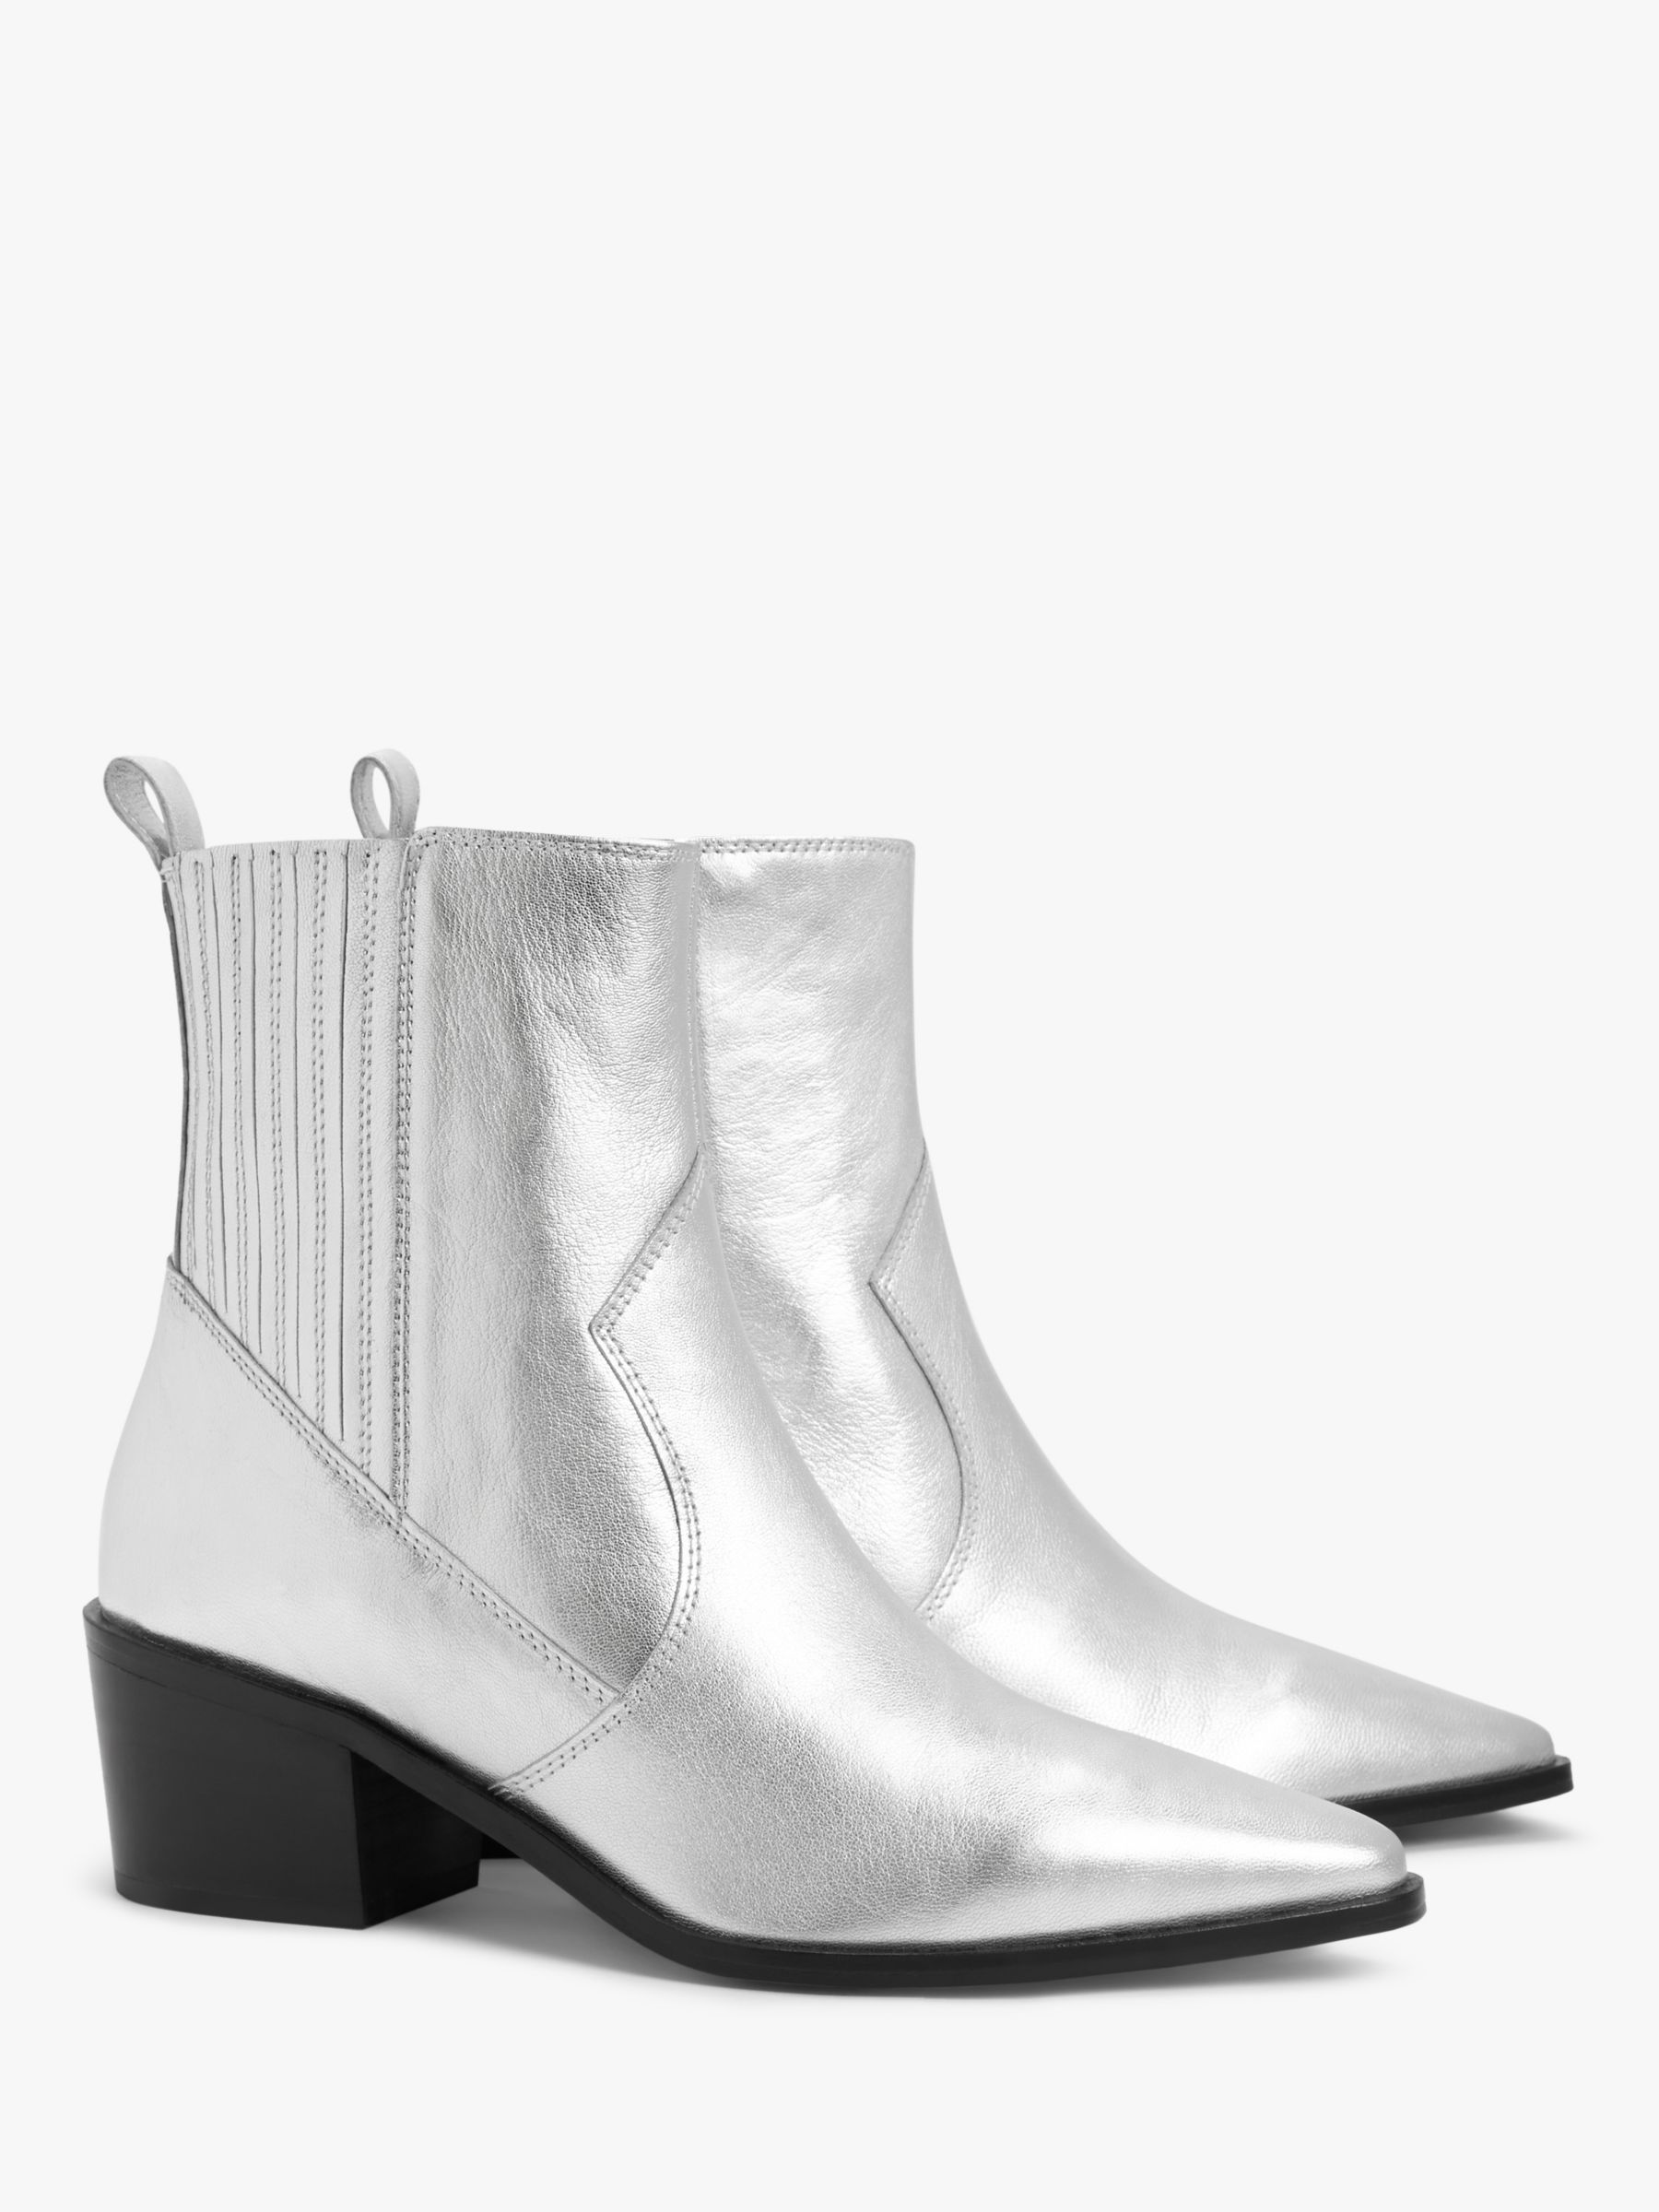 AND/OR Pixie Leather Heeled Chelsea Western Boots, Silver, 6